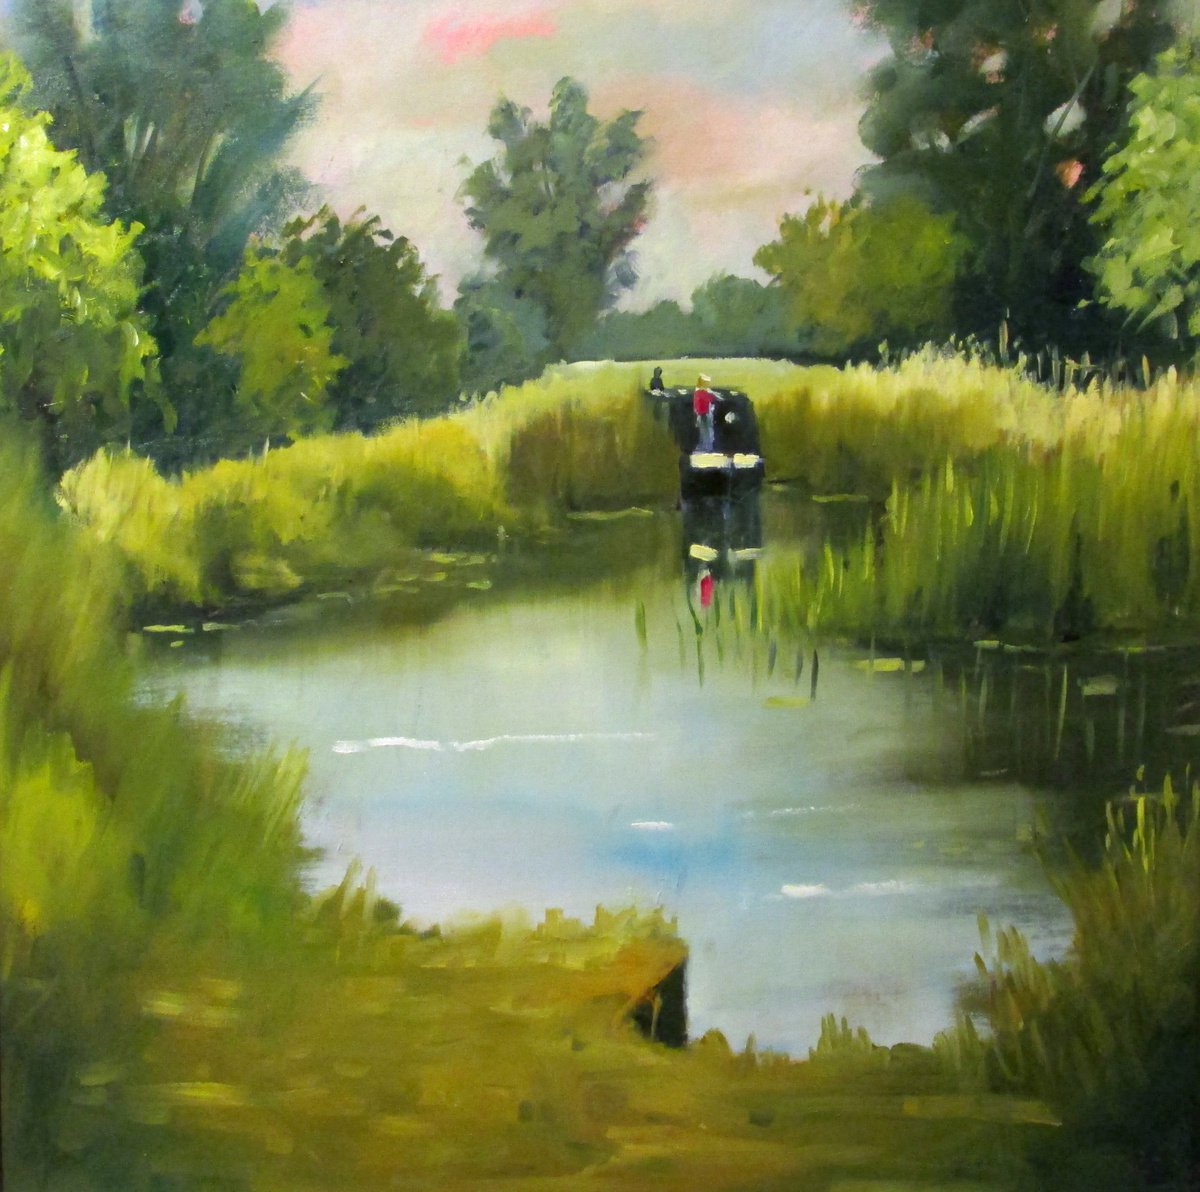 Emerging from the Reeds by Robert Wells